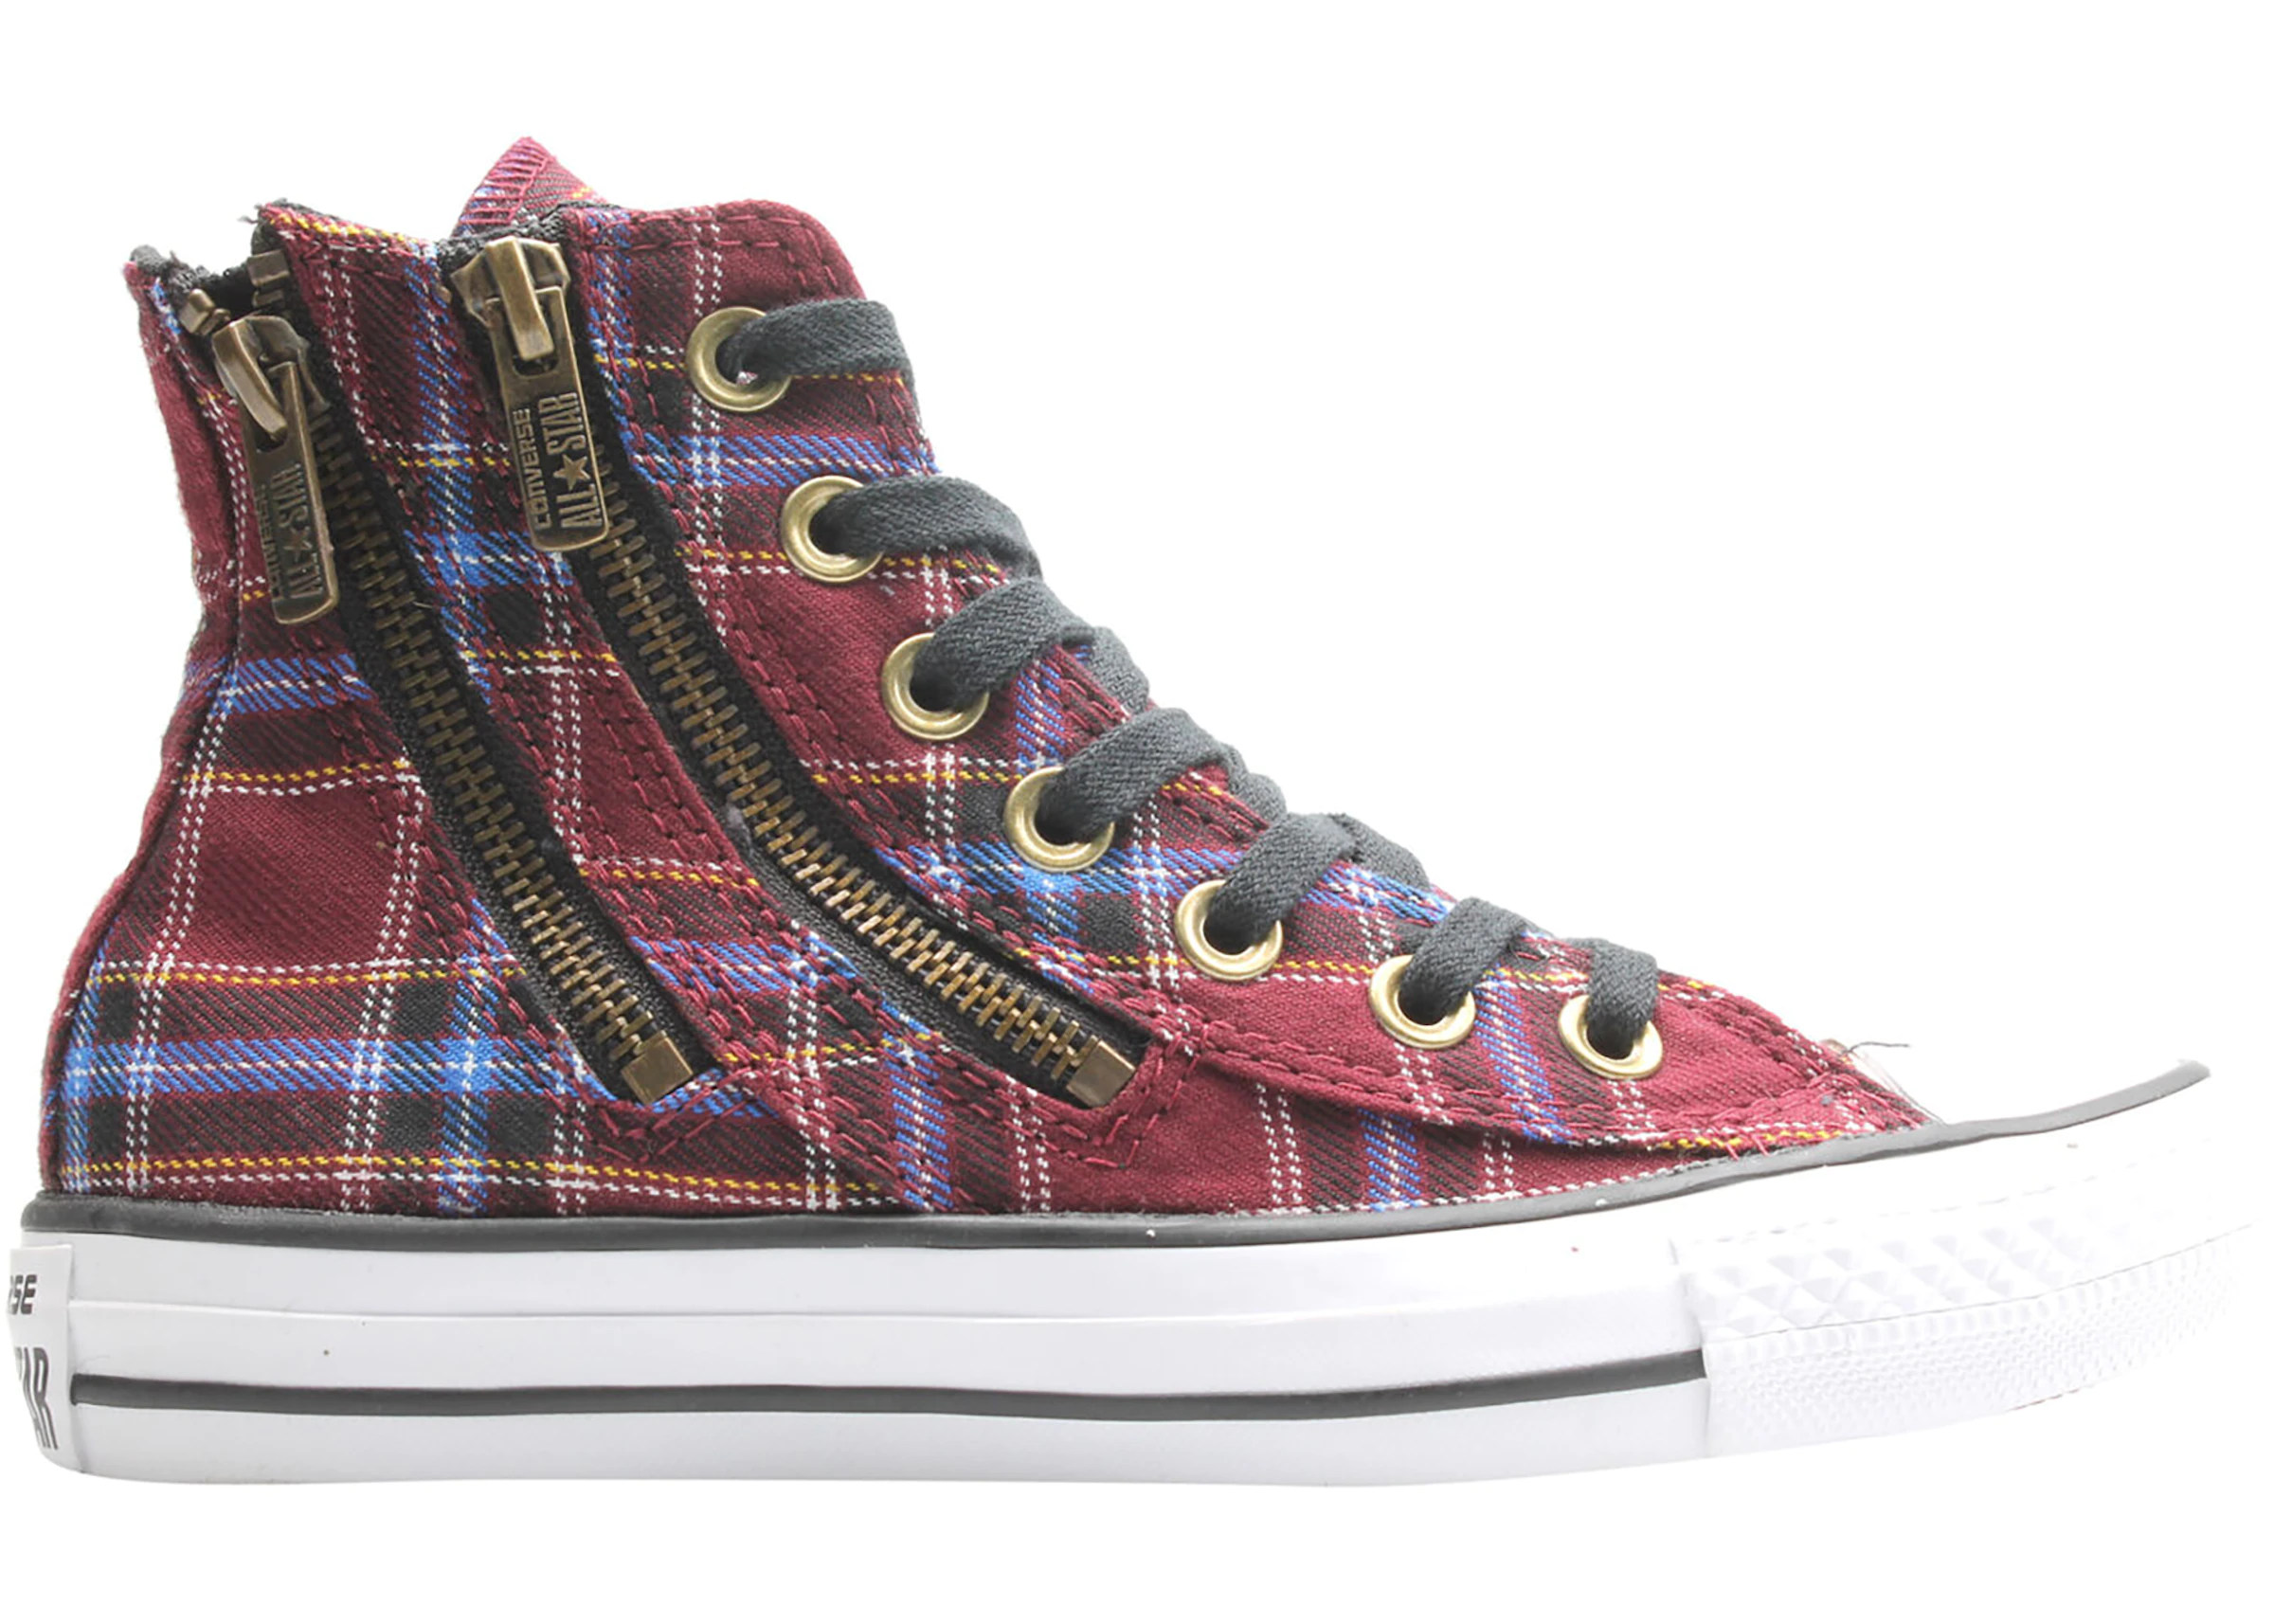 Prick Occur Fume Converse Chuck Taylor All-Star Double Zip Hi Red Plaid (W) - 549574C - US